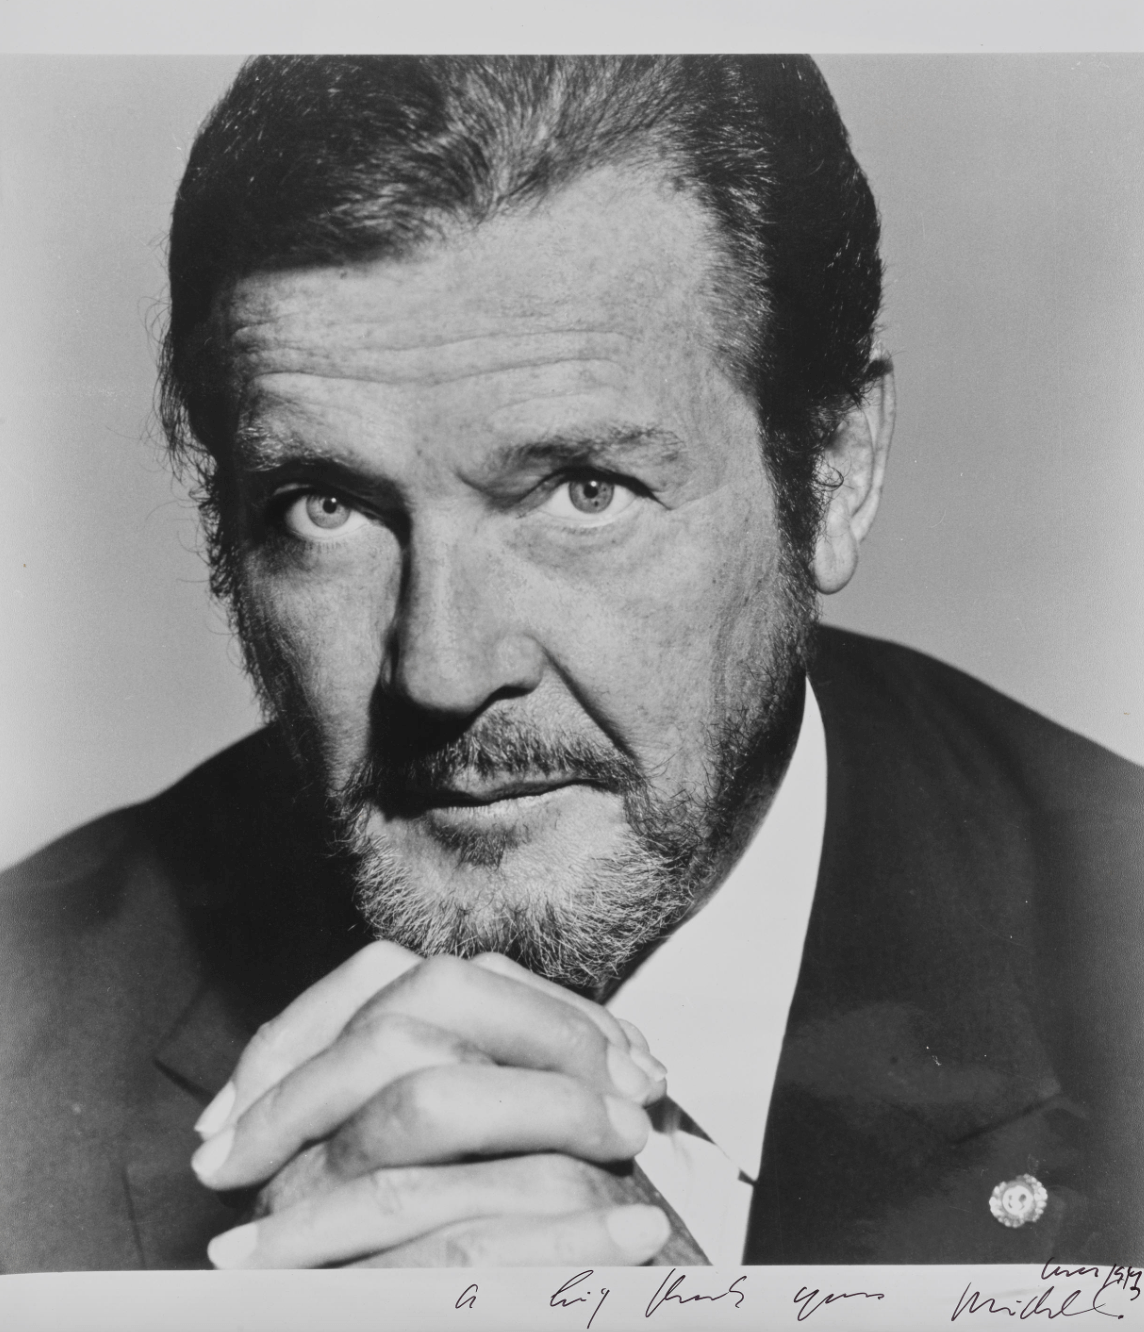 A large black and white portrait photograph of Sir Roger Moore